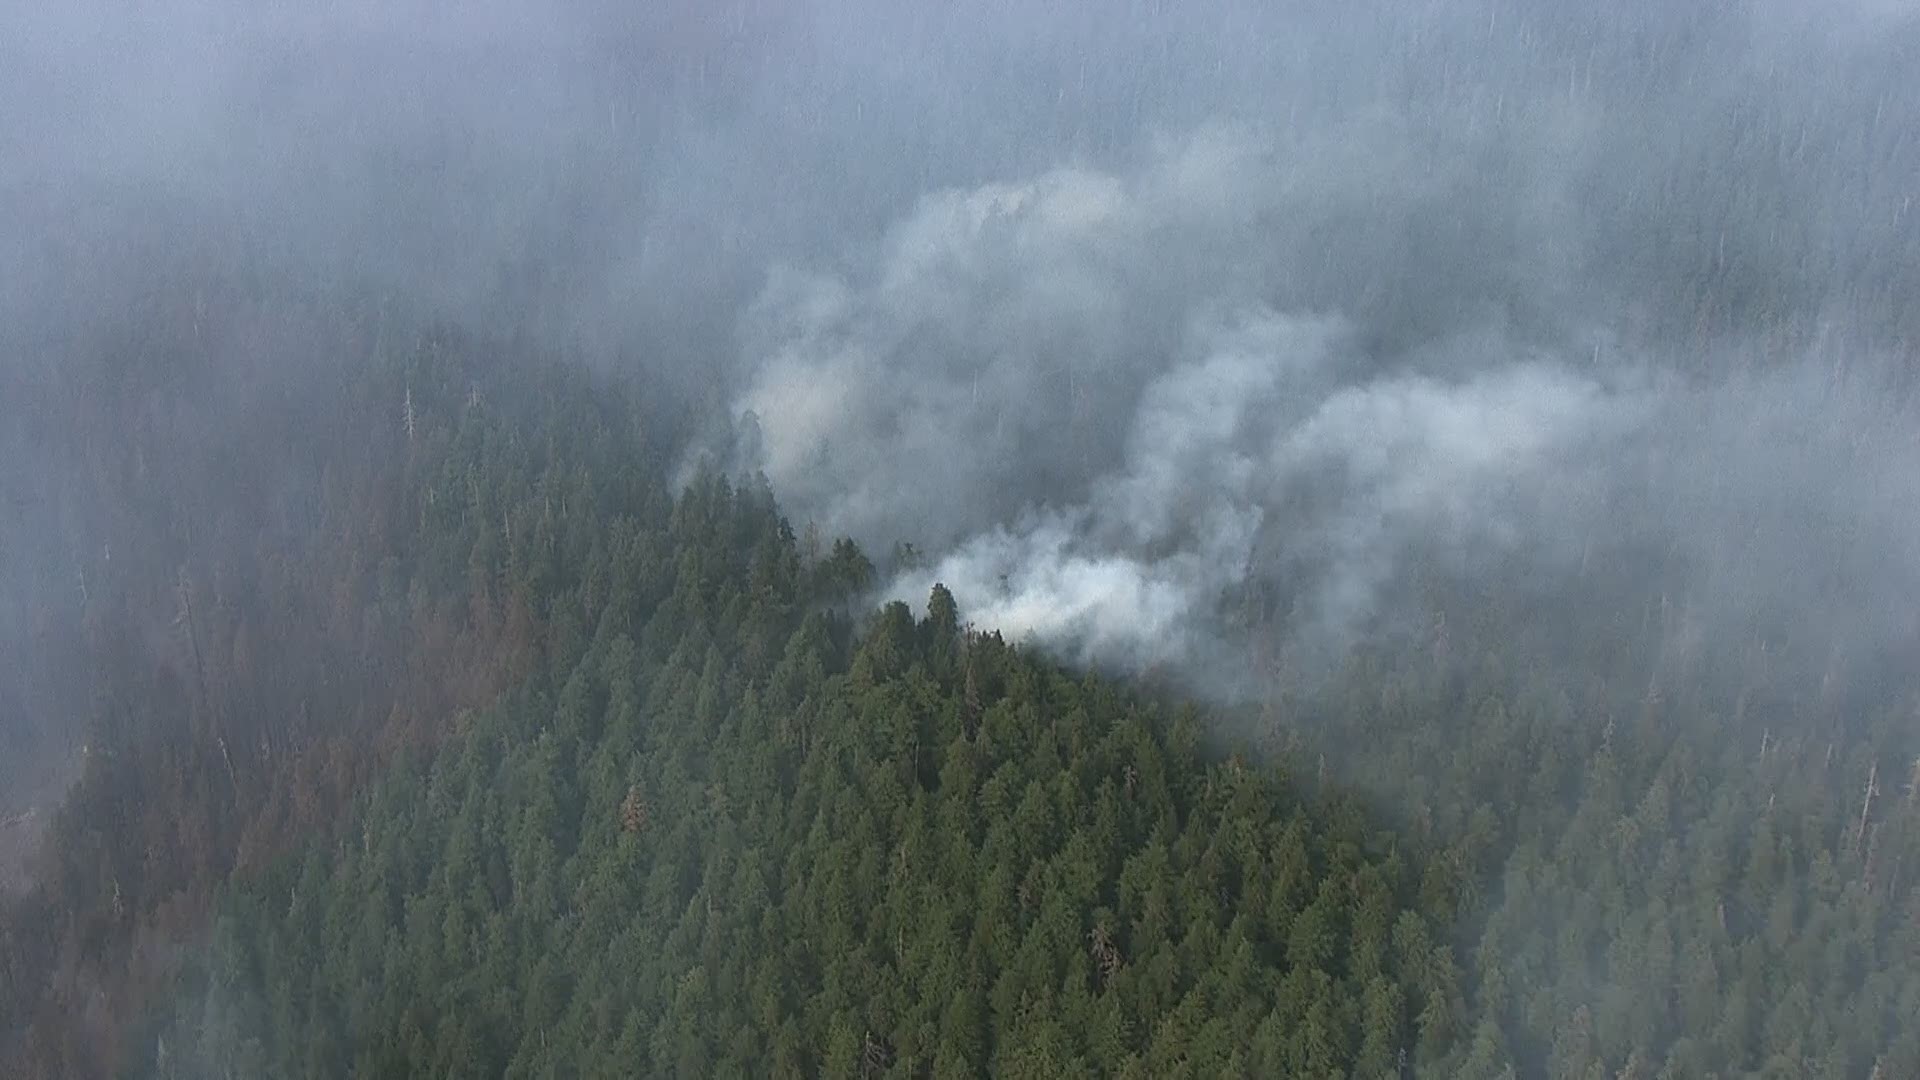 Sky 8 video from Sept. 7, 2017 of the damage left behind by Eagle Creek Fire